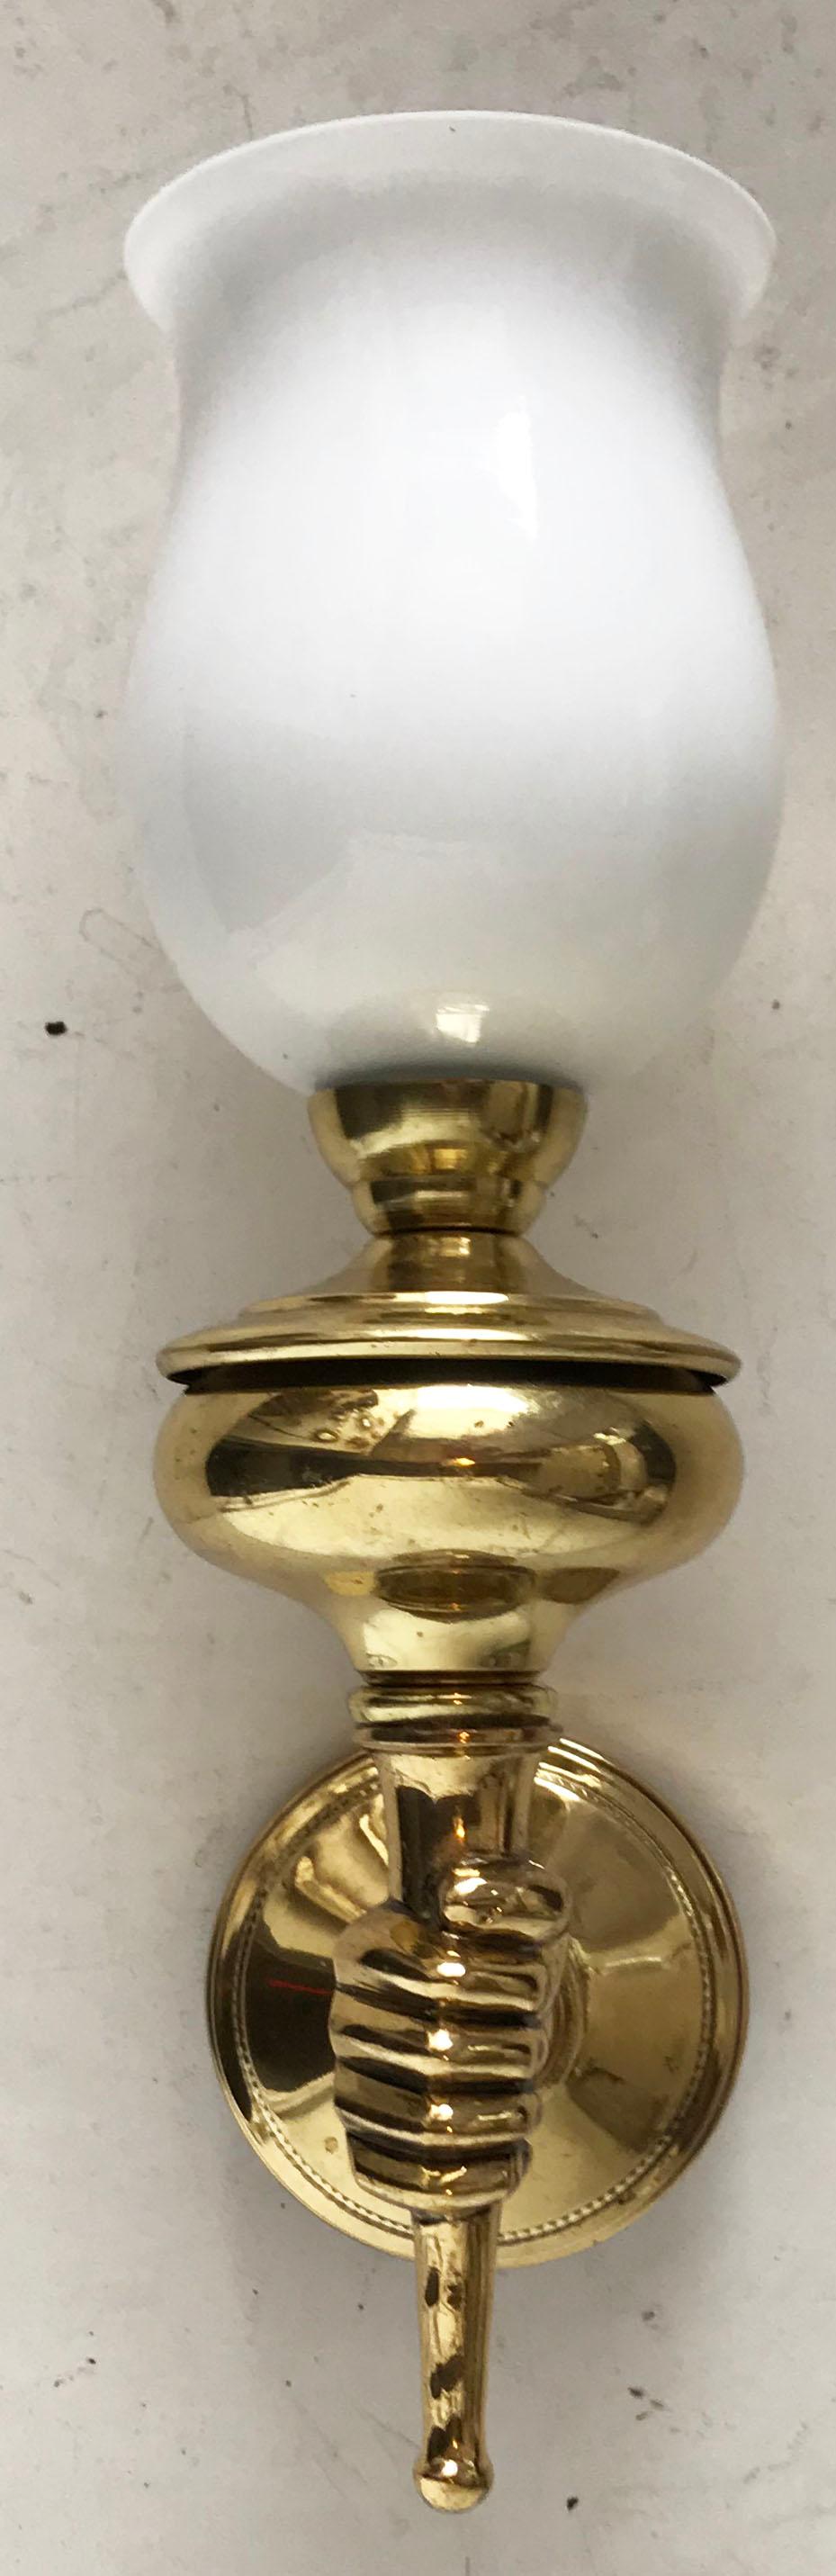 20th Century Pair of Arbus Sconces. 2 pairs available. Priced by pair